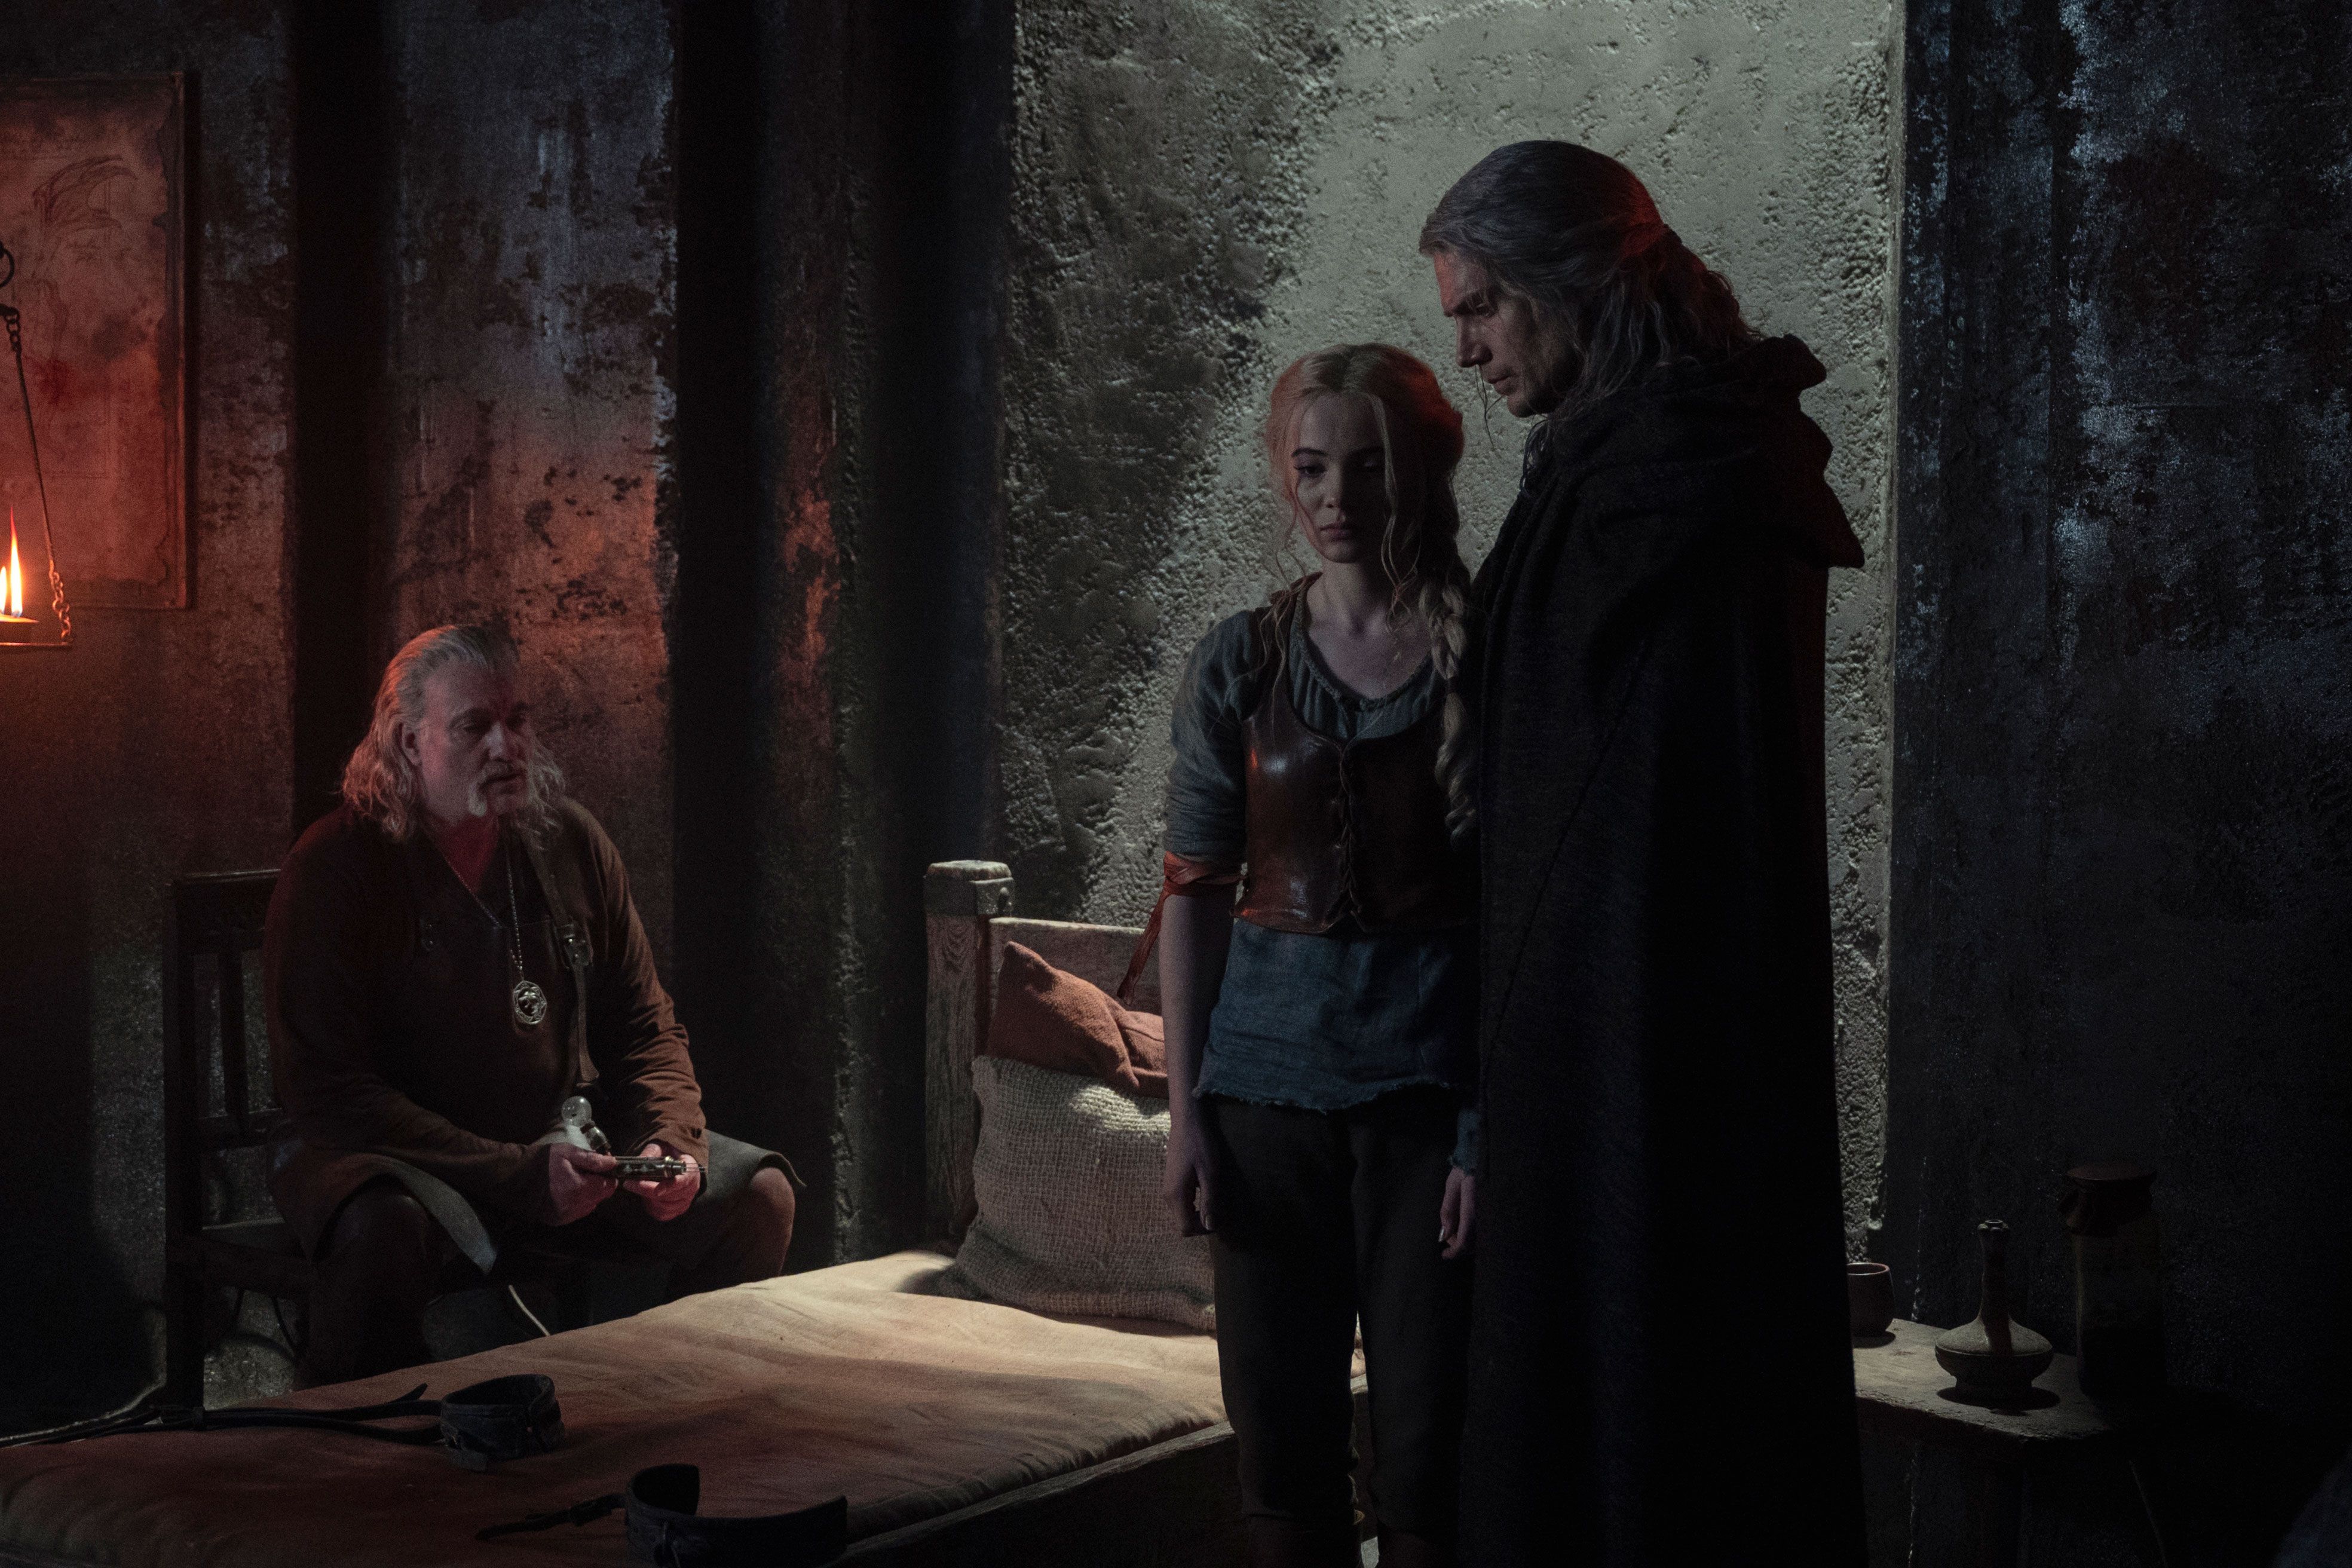 Henry Cavill, Freya Allen and Kim Bodnia in The Witcher